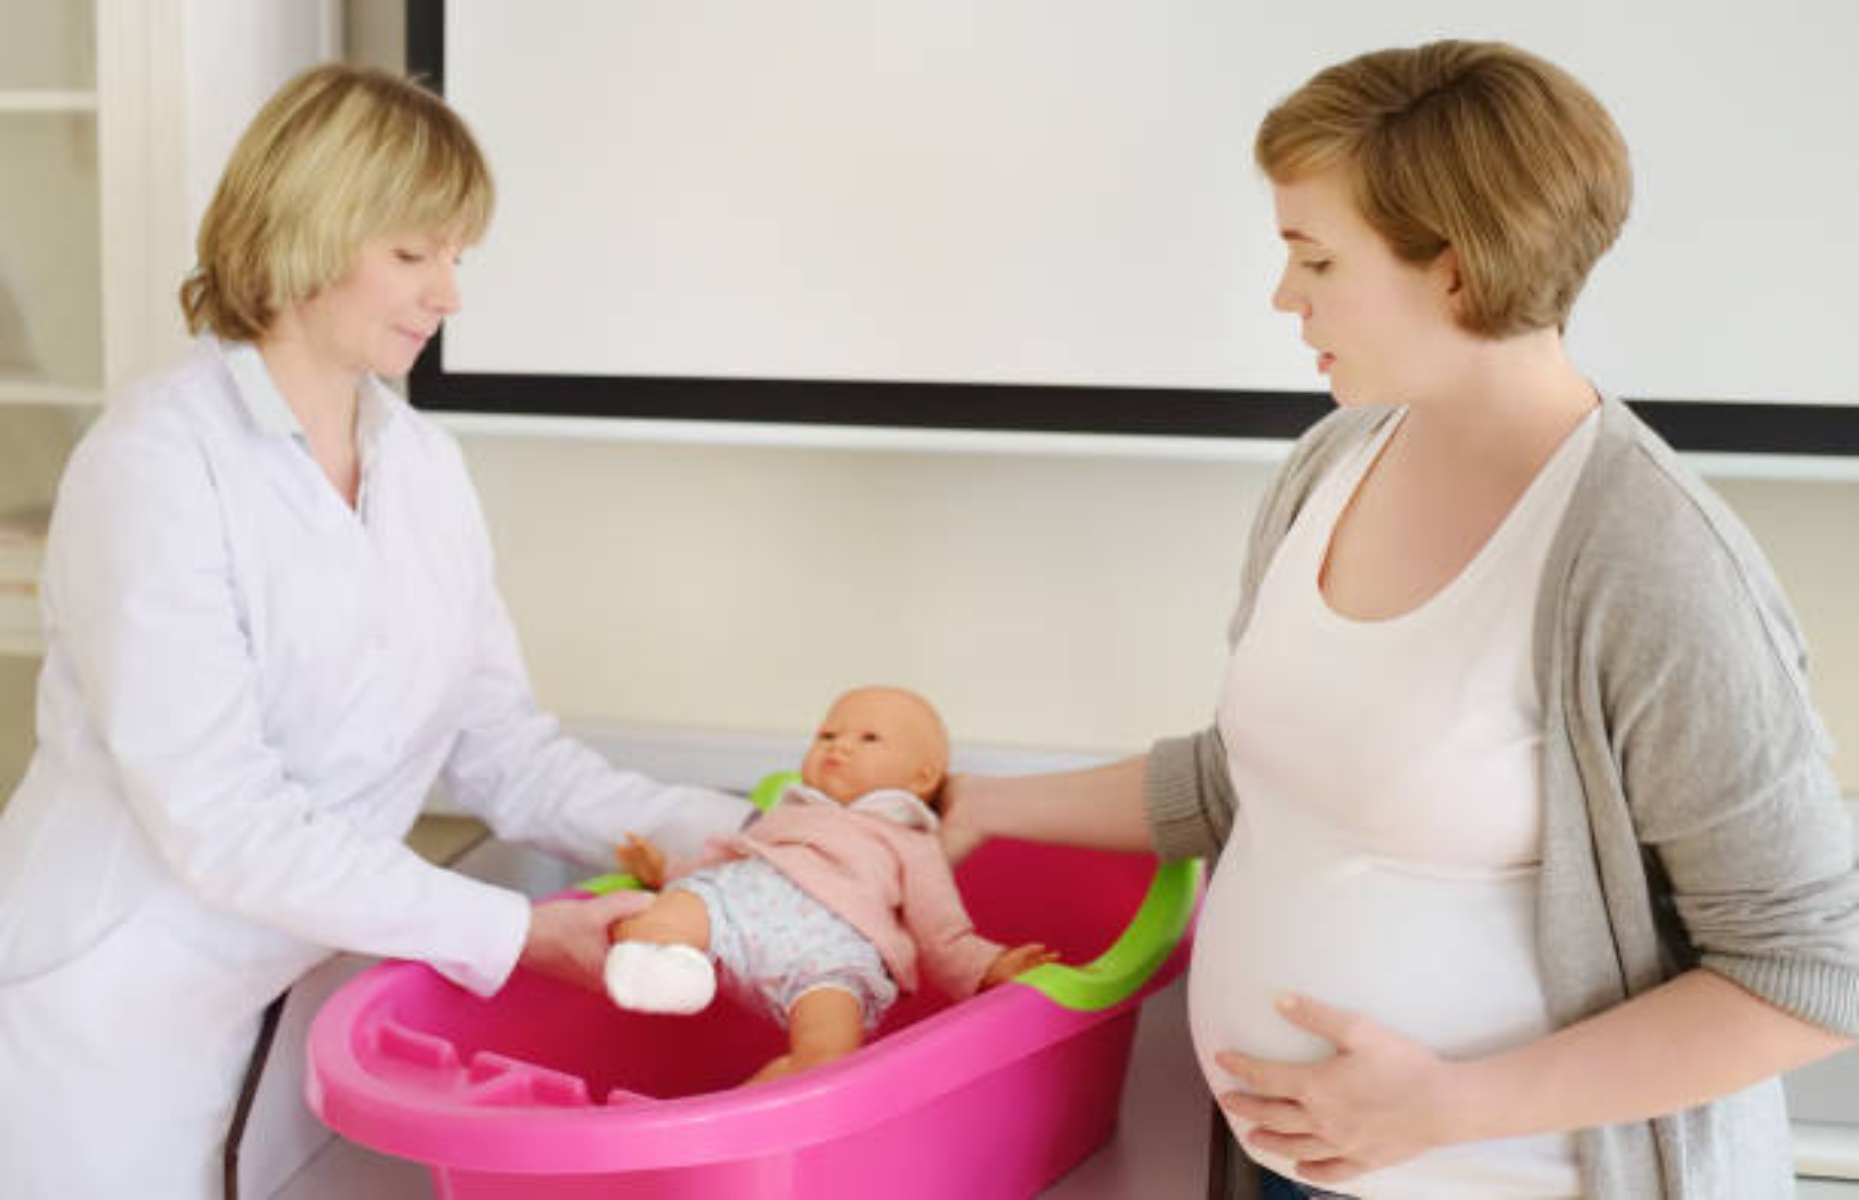 Get childbirth education classes for safe and sound birthing.